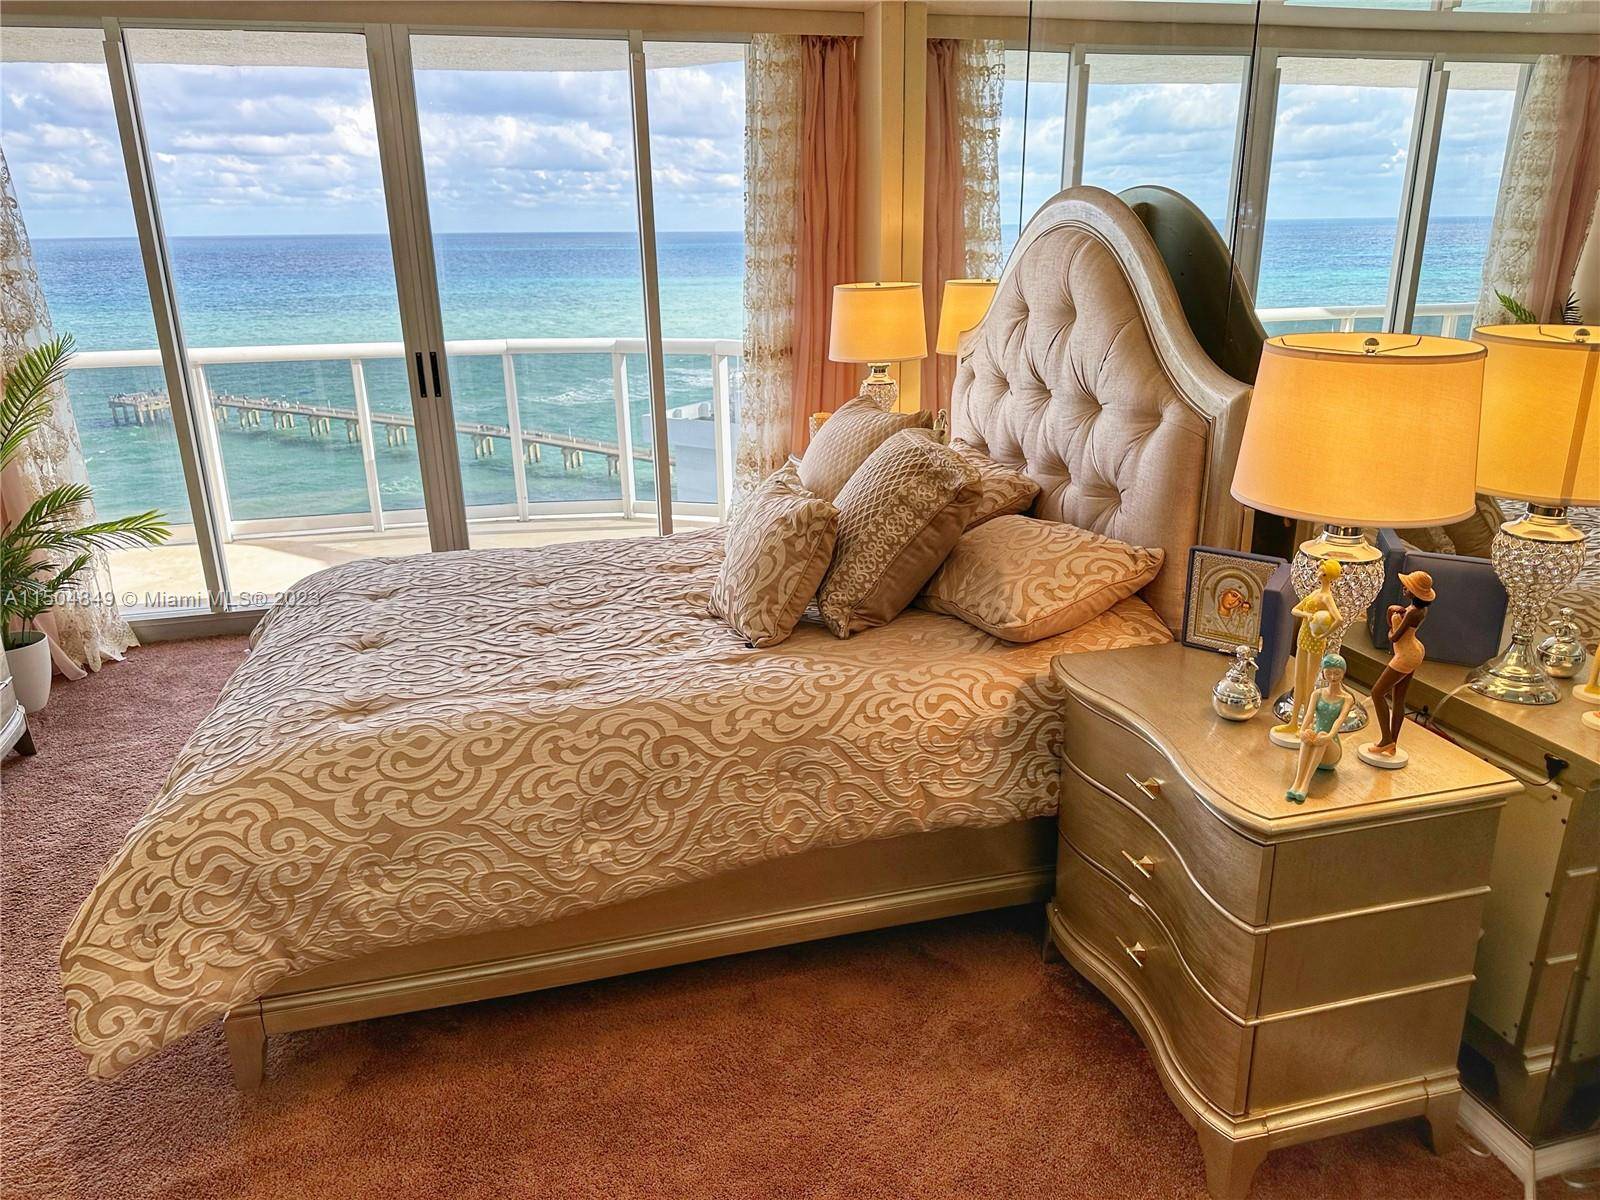 Discover unparalleled beachfront living in this expansive 3 bedroom, 2 bathroom unit at Sands Pointe, Sunny Isles.